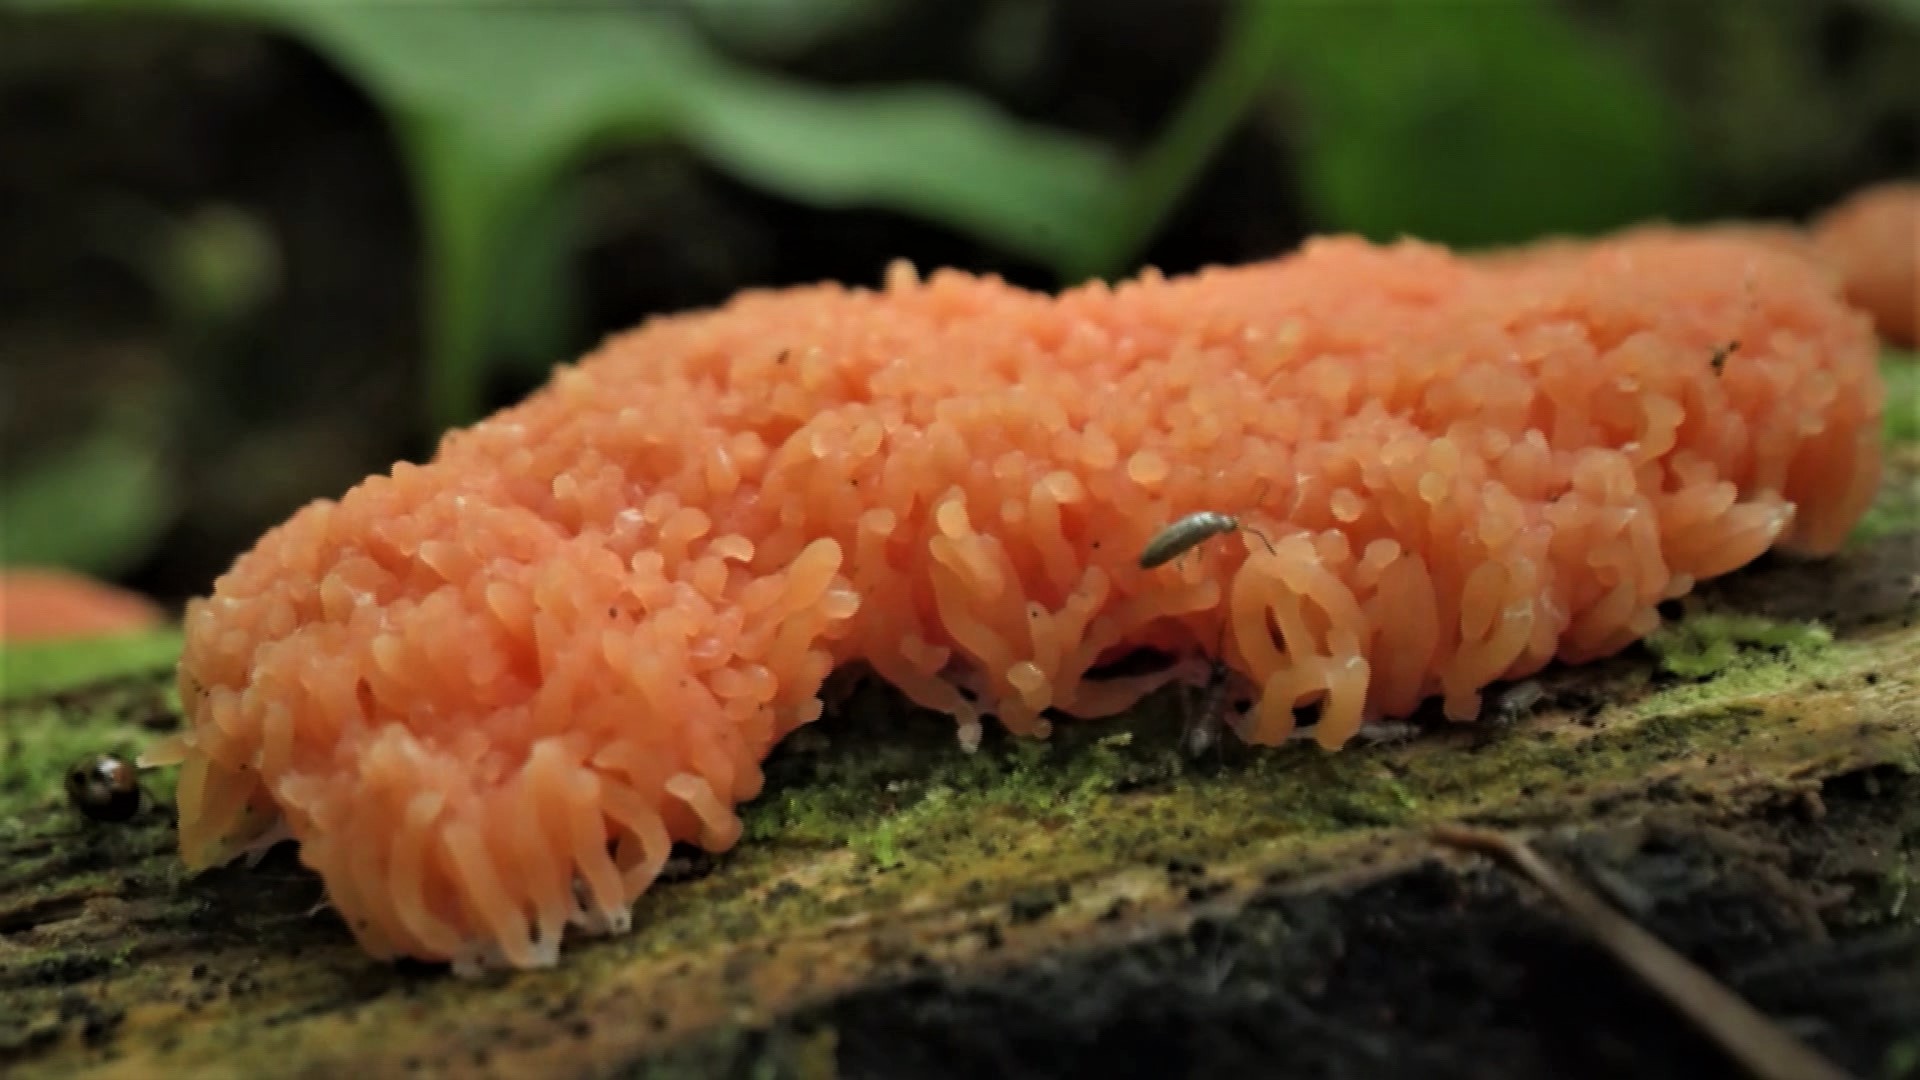 Slime molds are decomposers of the forest, often found on rotting logs. They may look like fungus, but they can move.